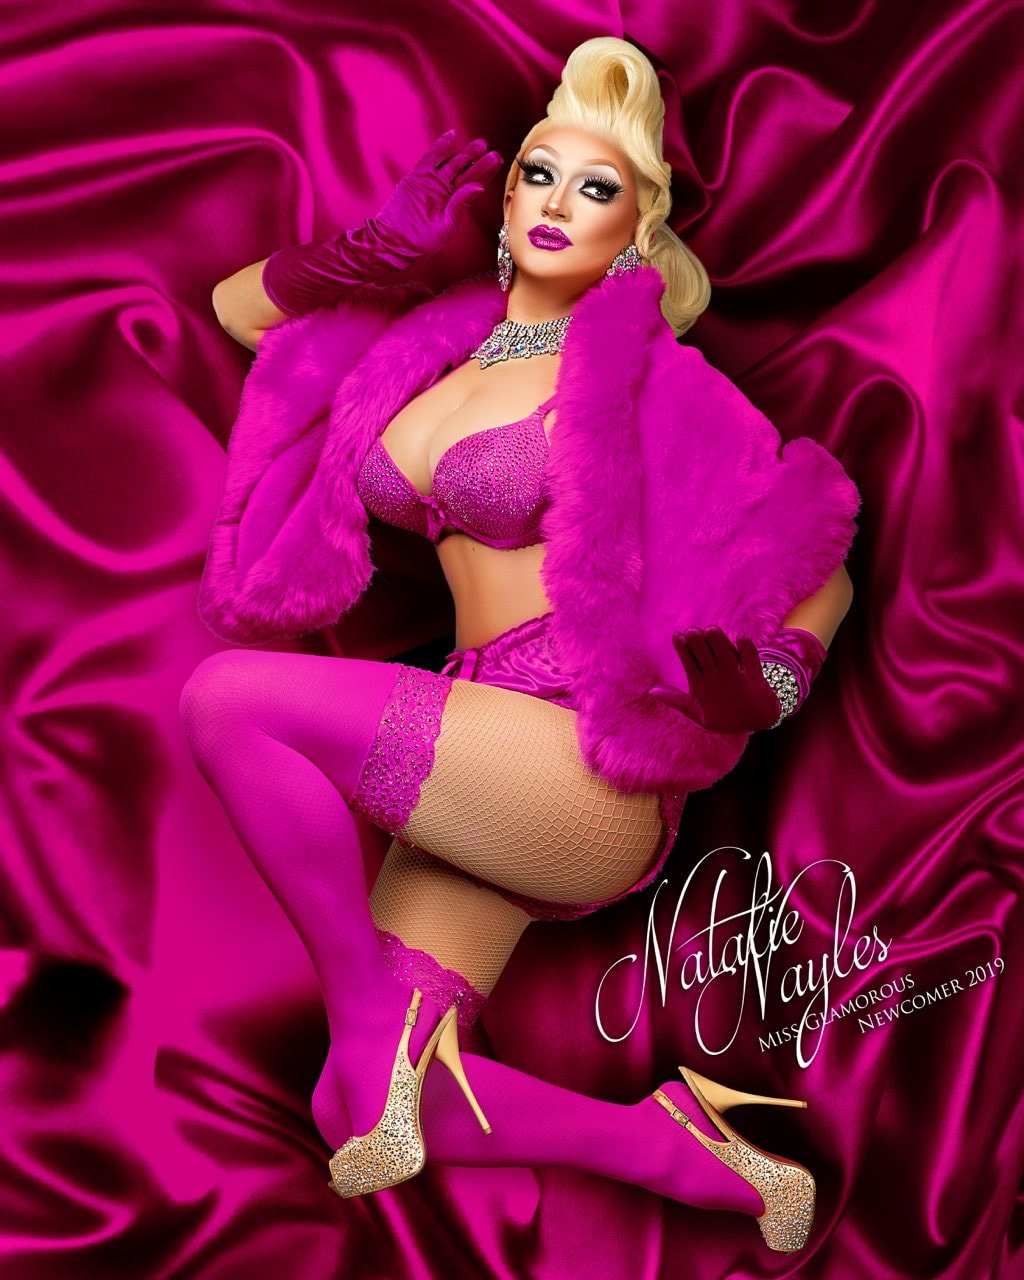 Natalie Nayles – Photo by The Drag Photographer